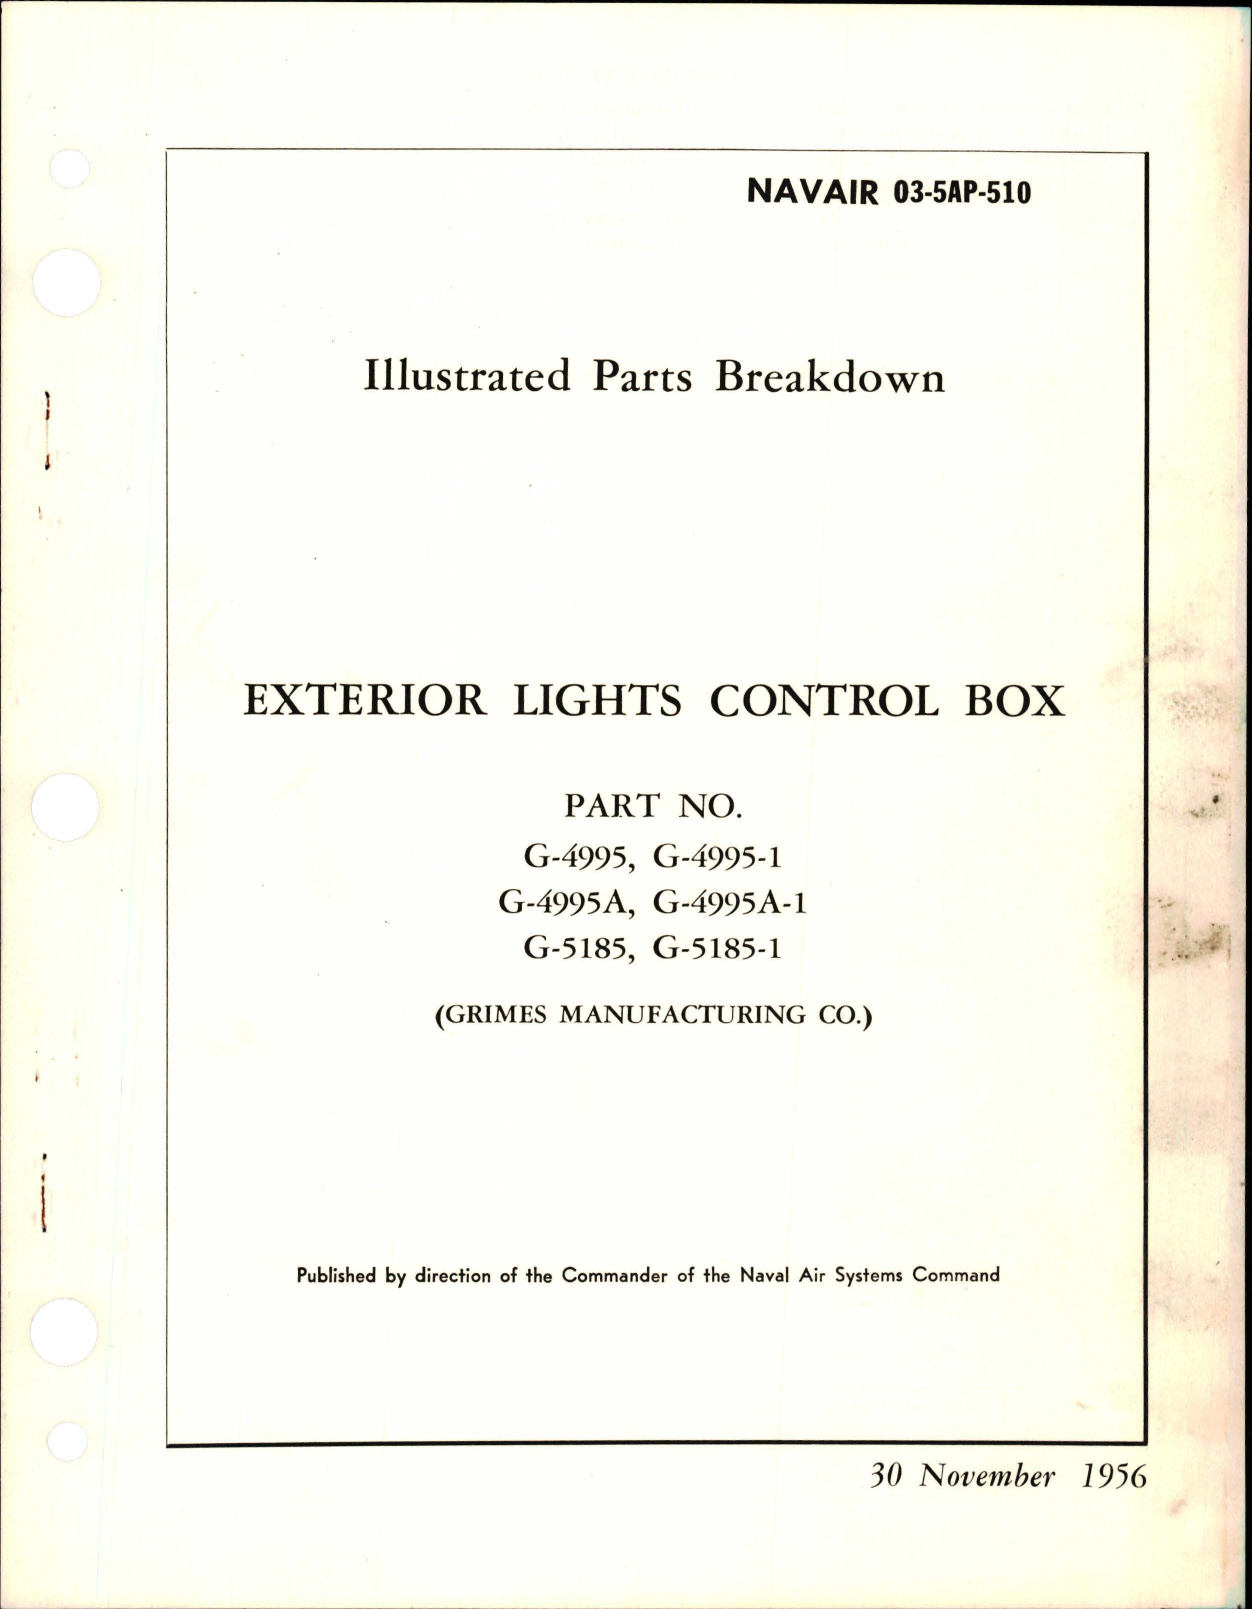 Sample page 1 from AirCorps Library document: Illustrated Parts Breakdown for Exterior Lights Control Box 